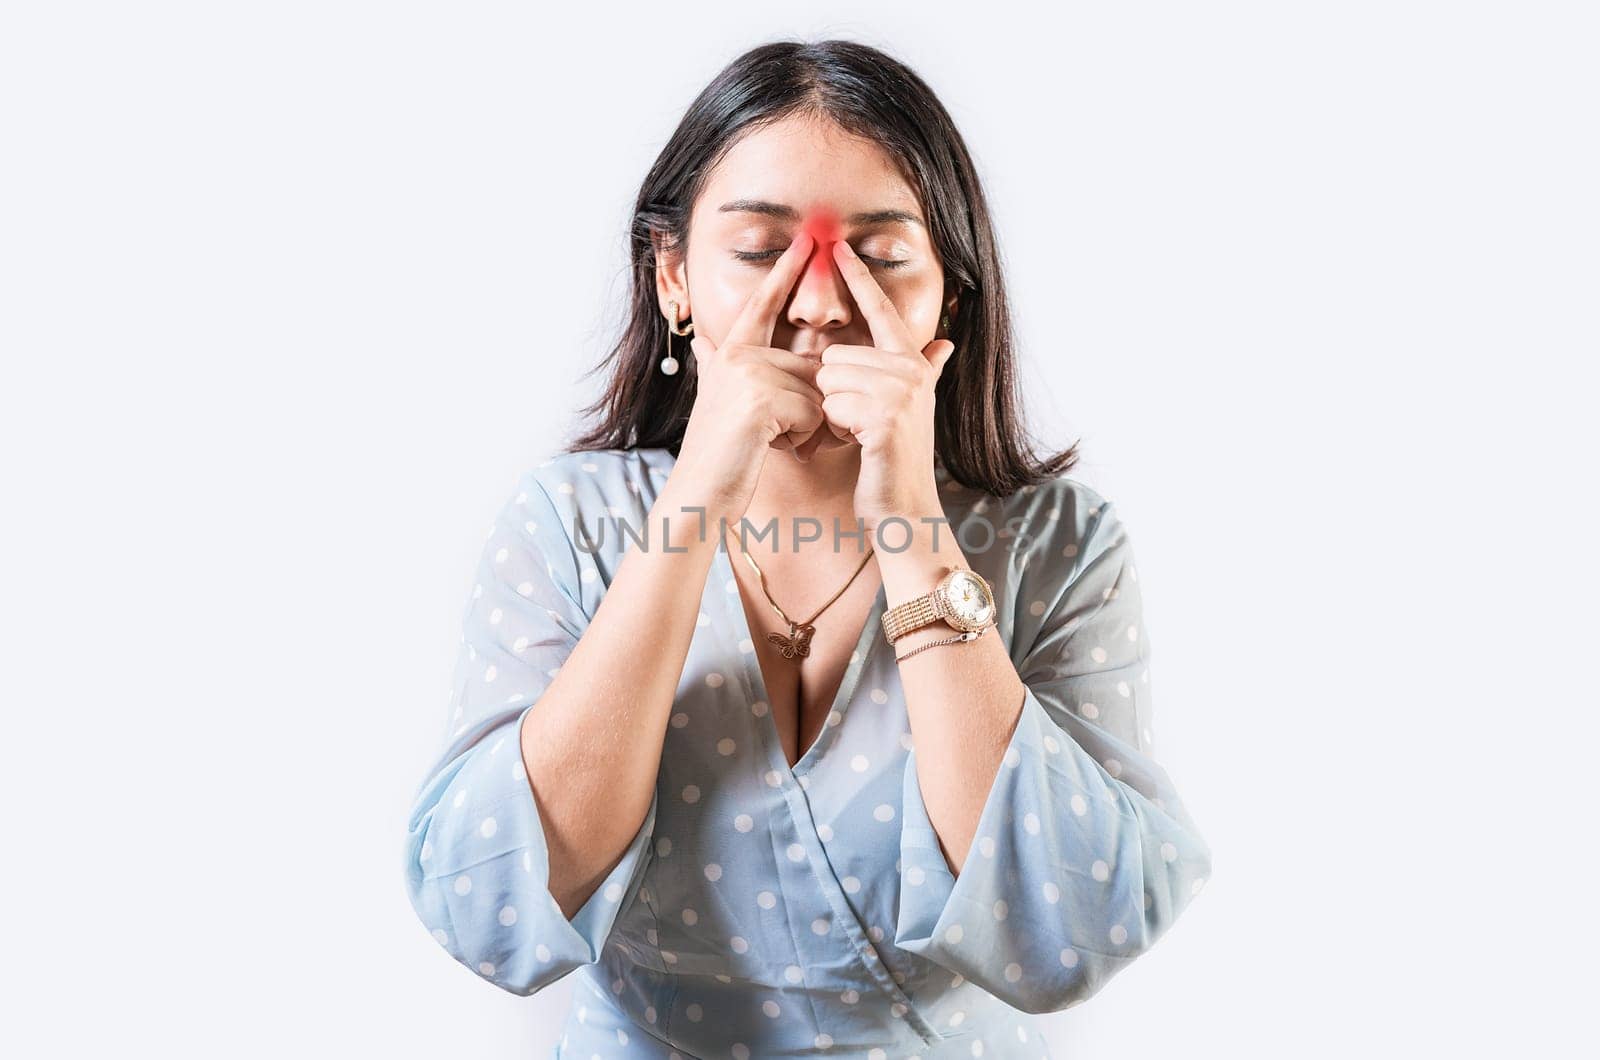 Girl with nasal bridge headache. Sinus pain concept. Young woman with pain touching nose. Person with nasal bridge pain